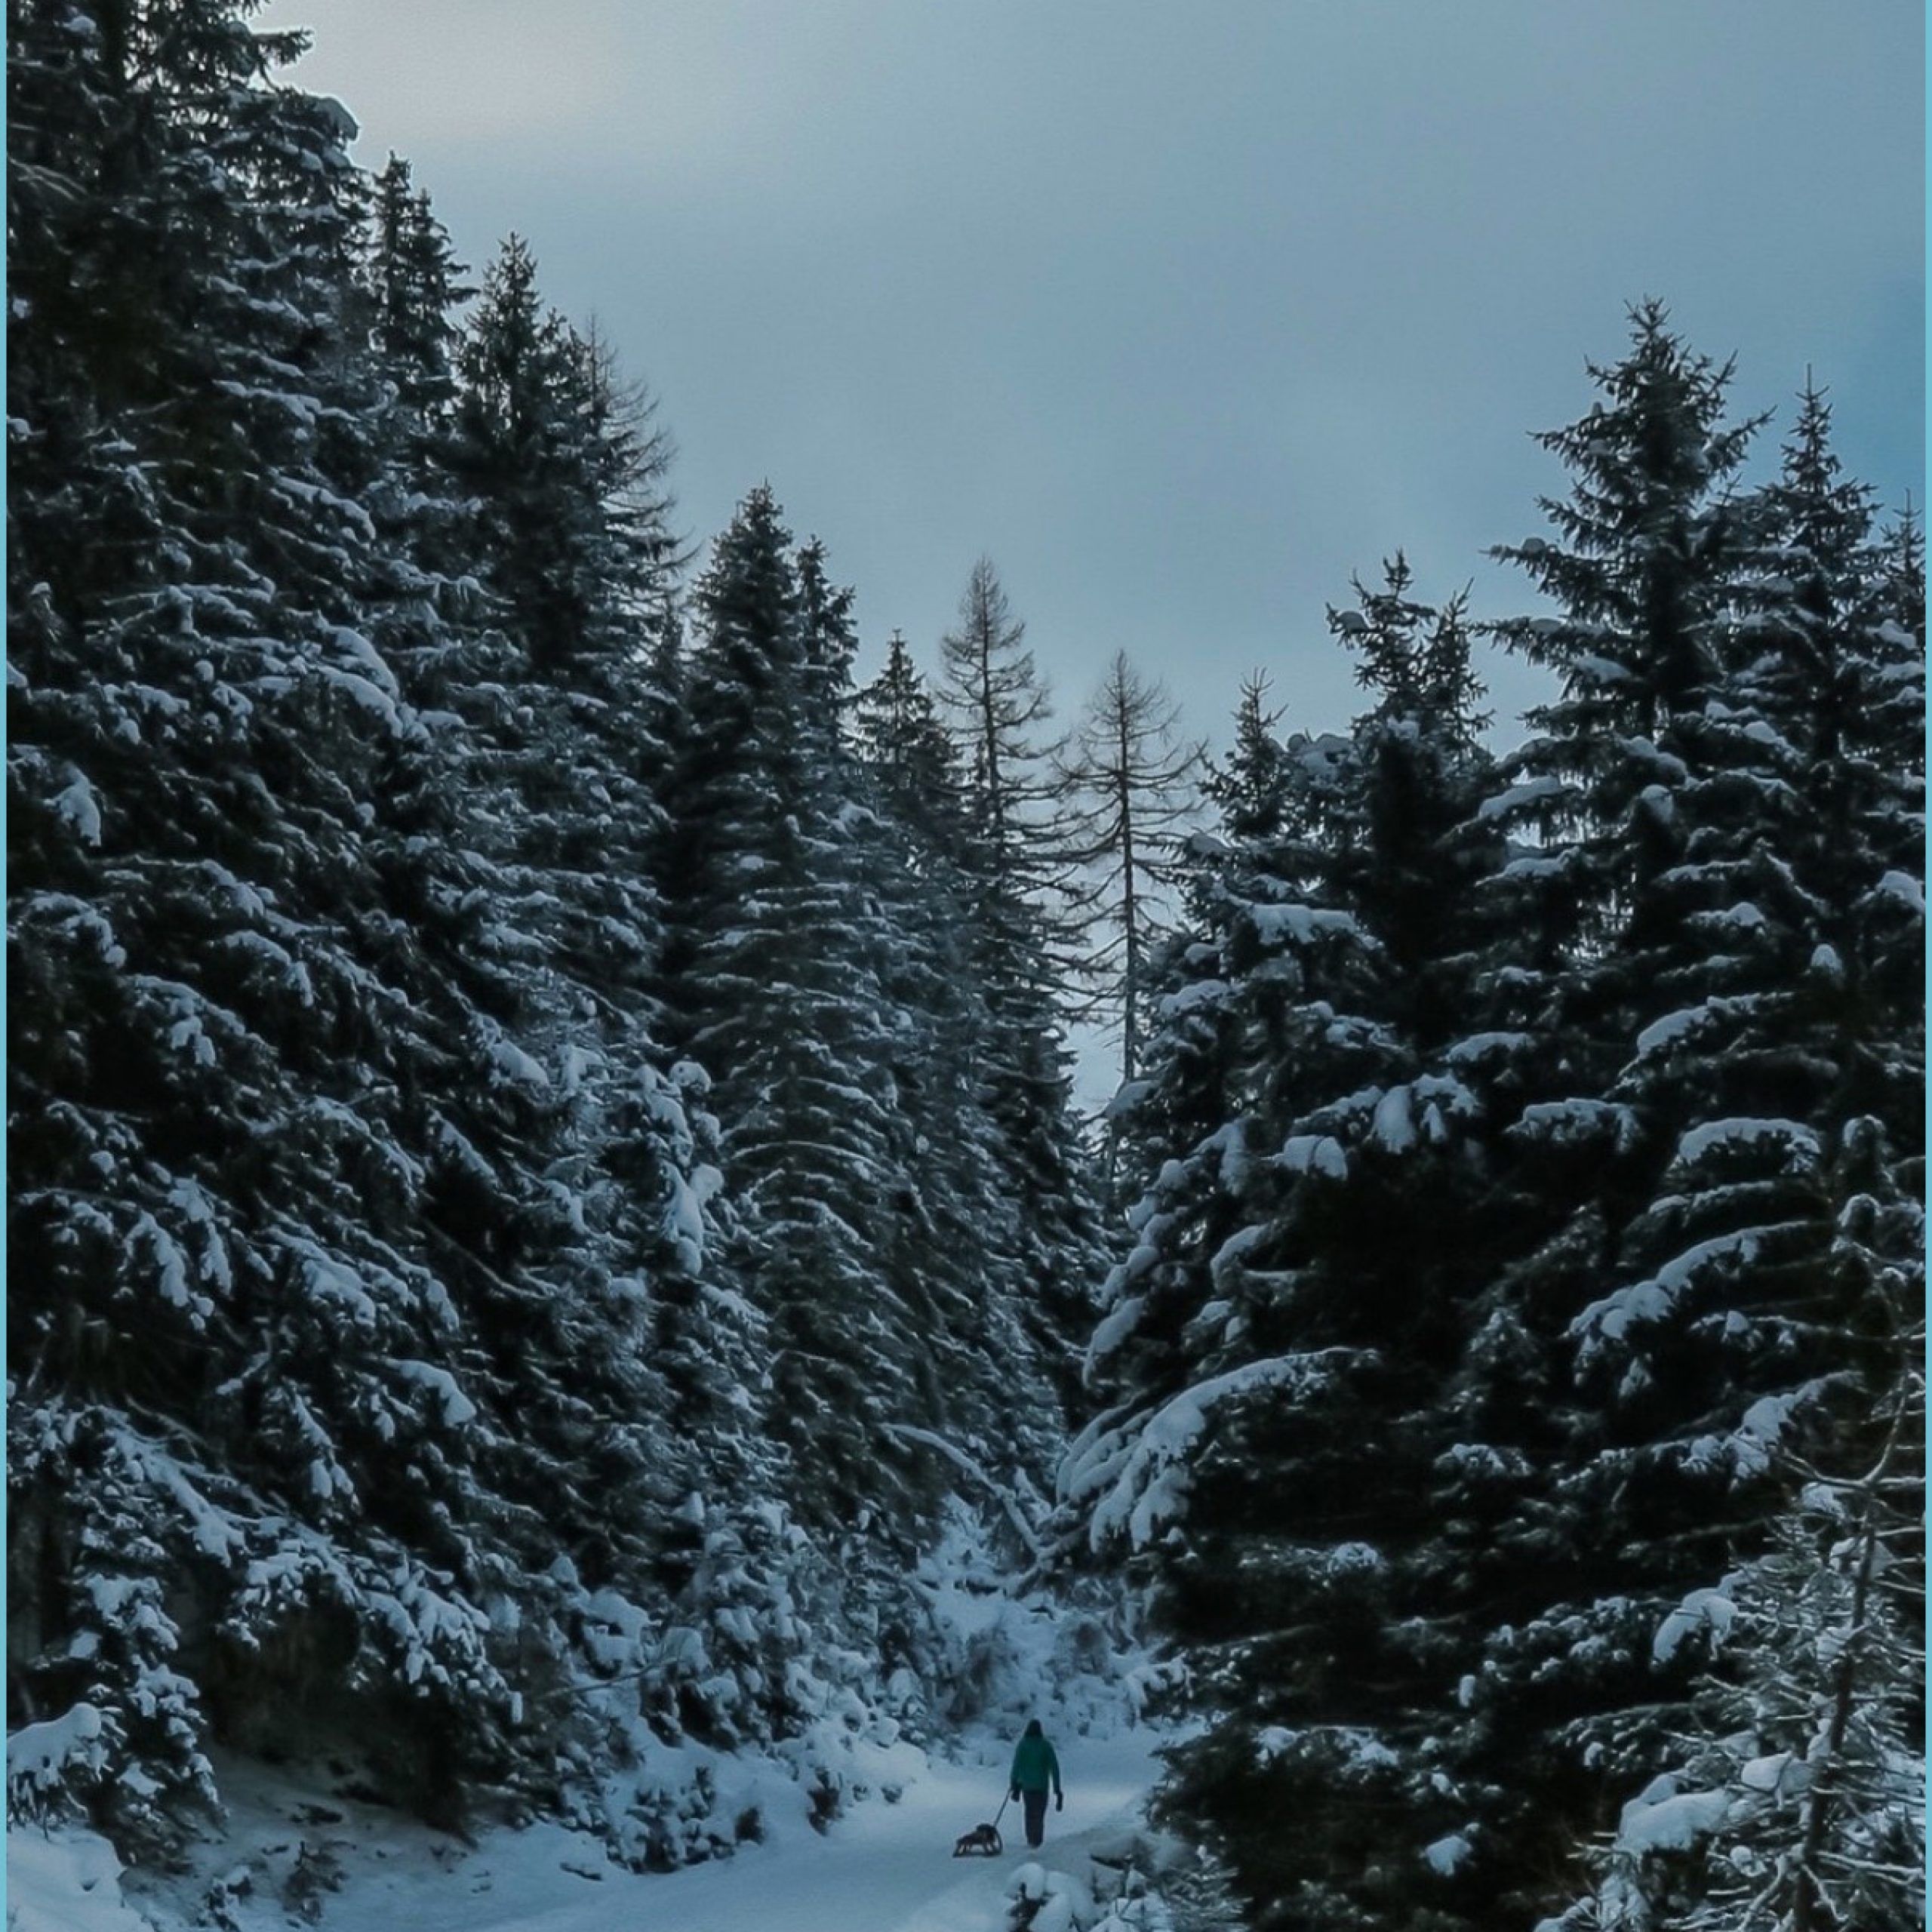 Winter Wonderland Wallpaper For iPhone And iPad Xs Max wallpaper iphone